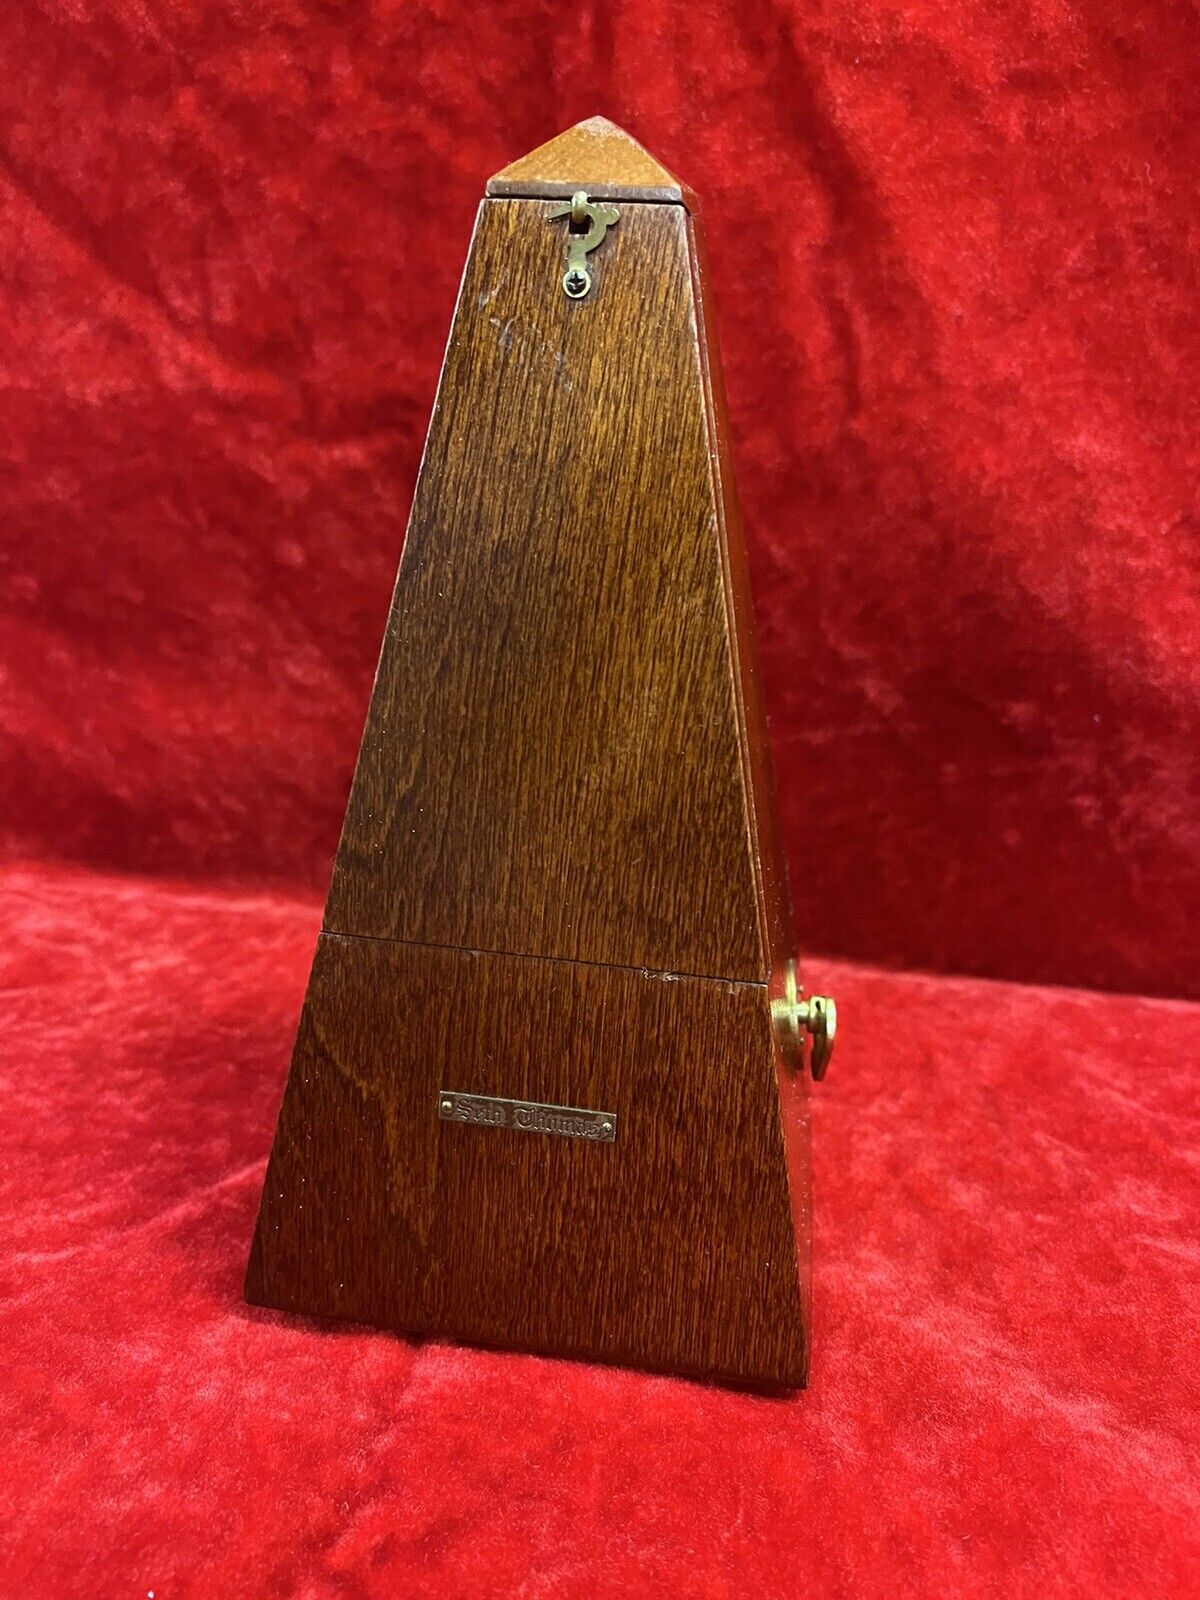 Vintage Seth Thomas Metronome Not Working Sold For Parts Only